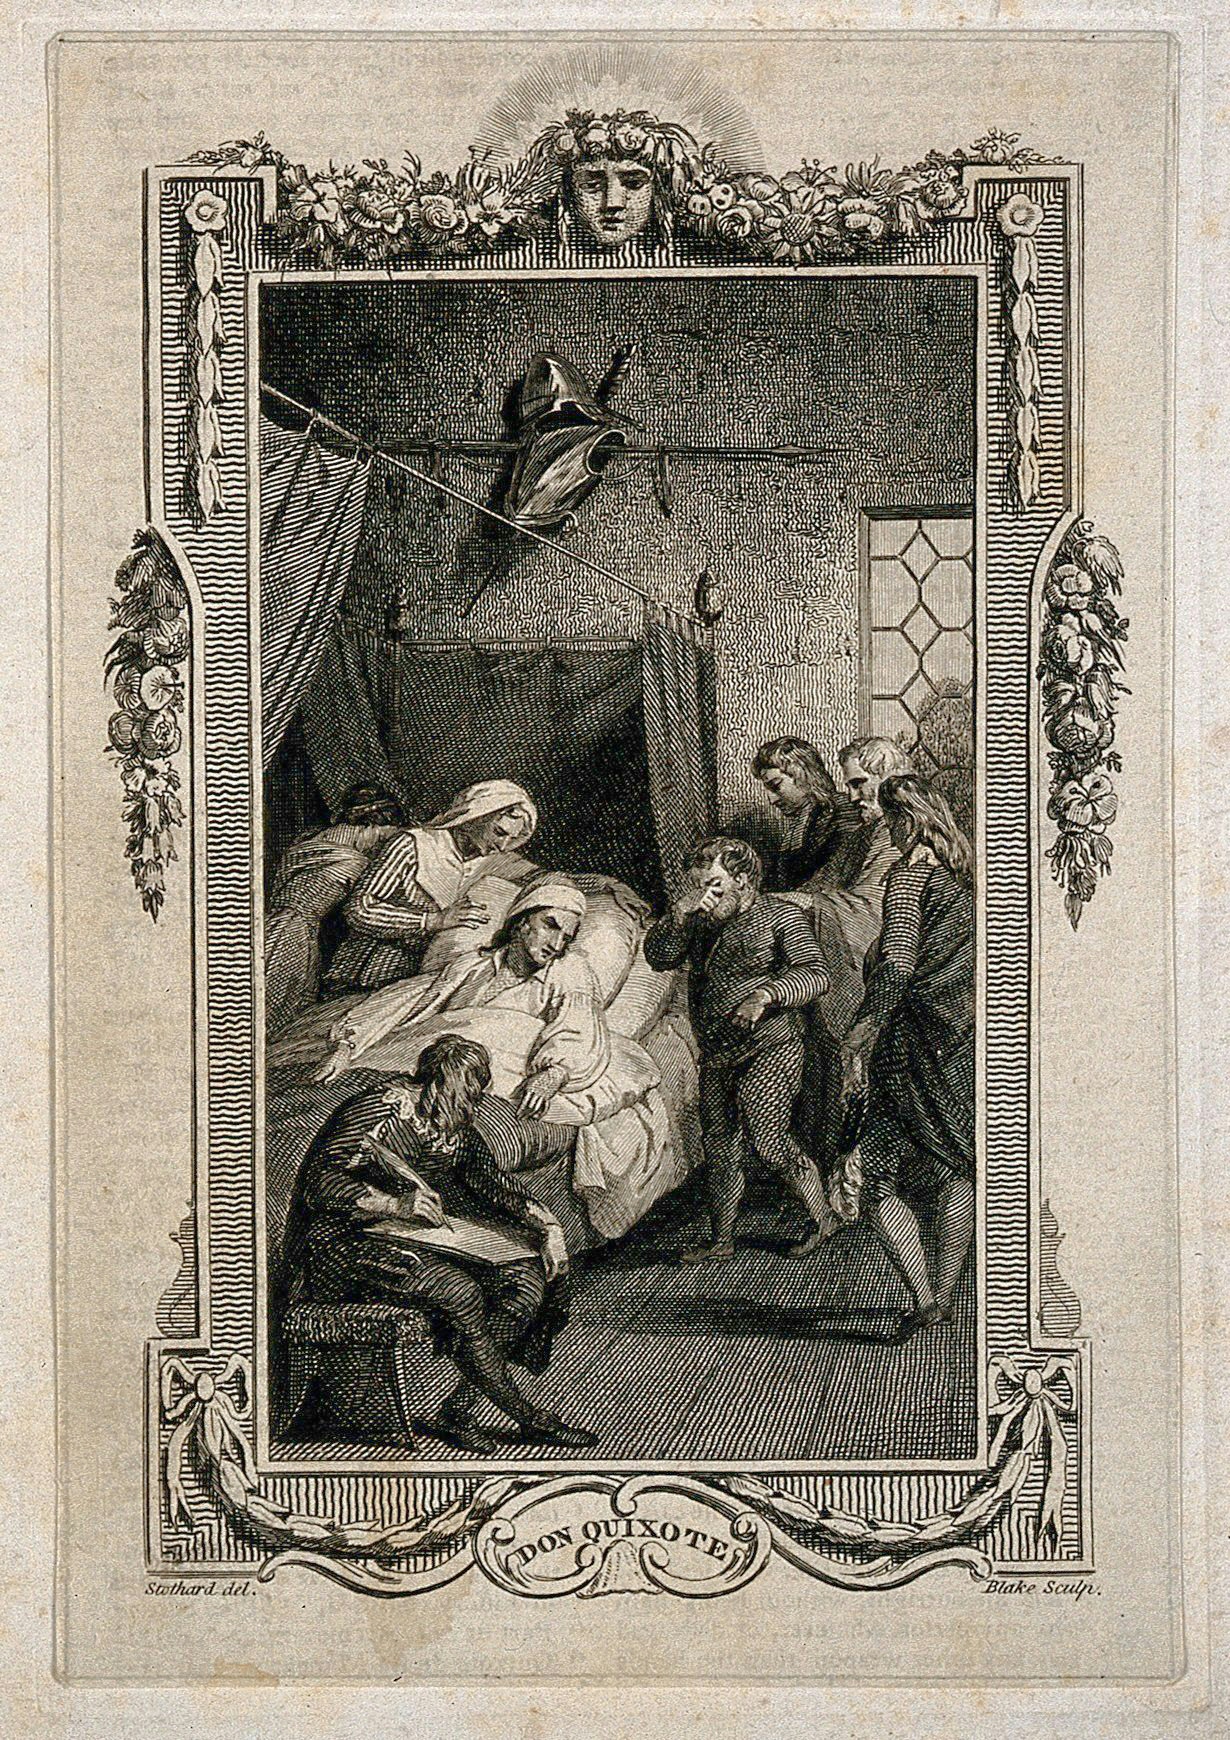 A line engraving of a scene in a bedroom, where a dead man wearing a long white shirt is in the bed surrounded by a mourning crowd, one of whom is shown to be weeping.